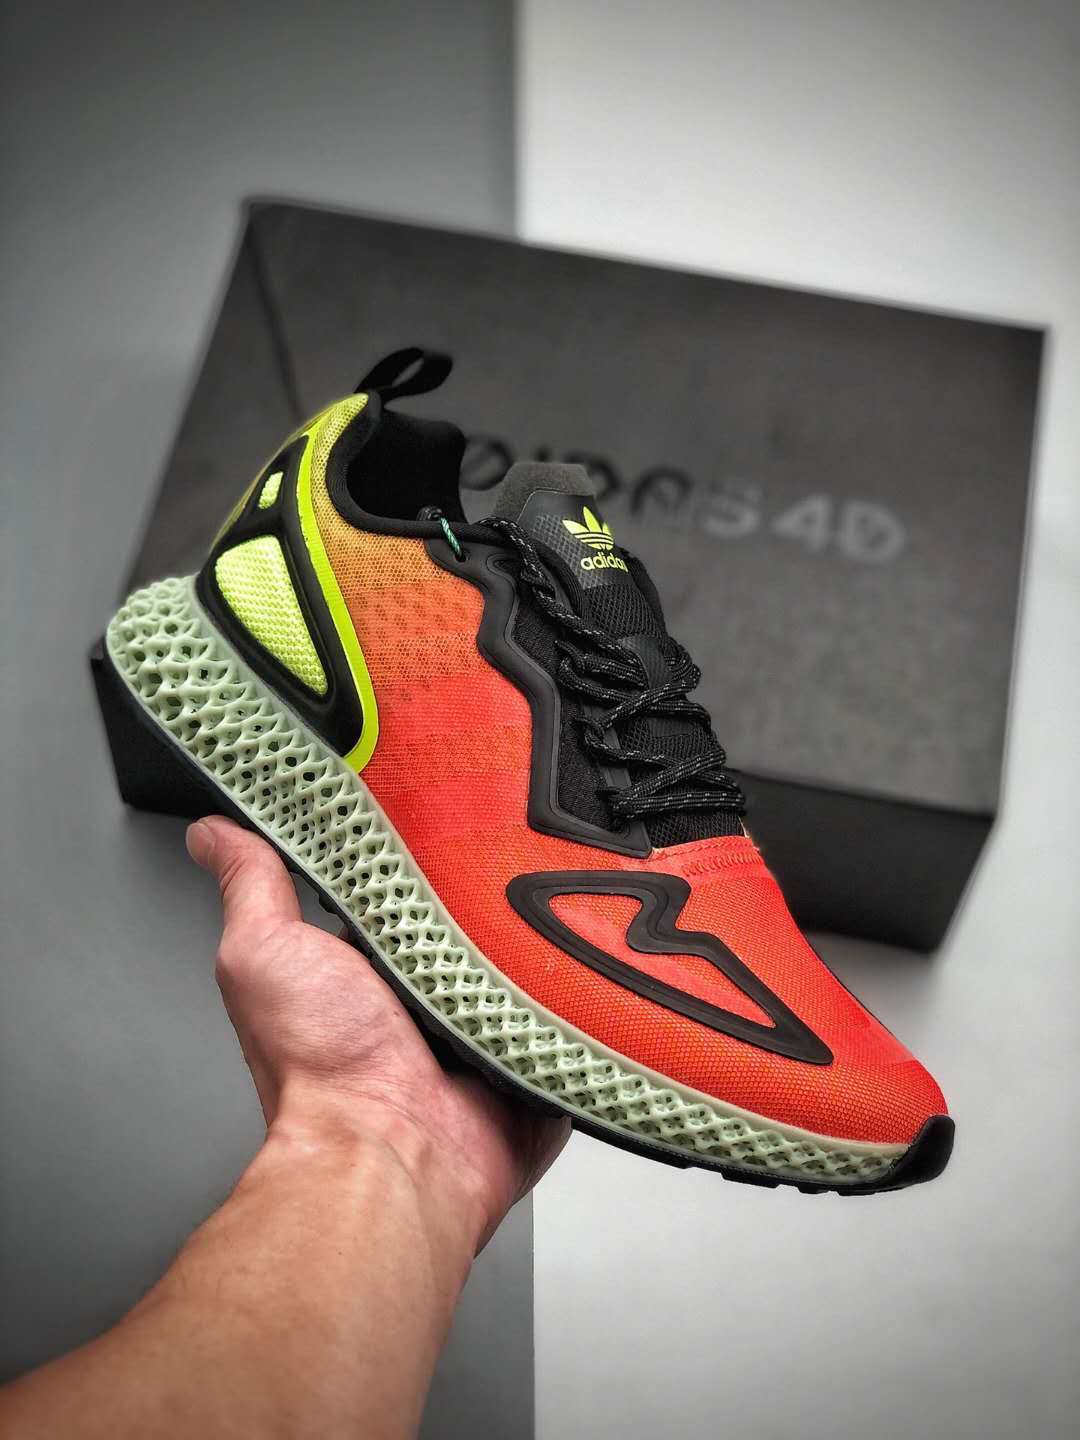 Adidas ZX 2K 4D Heatmap FV9028 - Futuristic Style and Unmatched Comfort